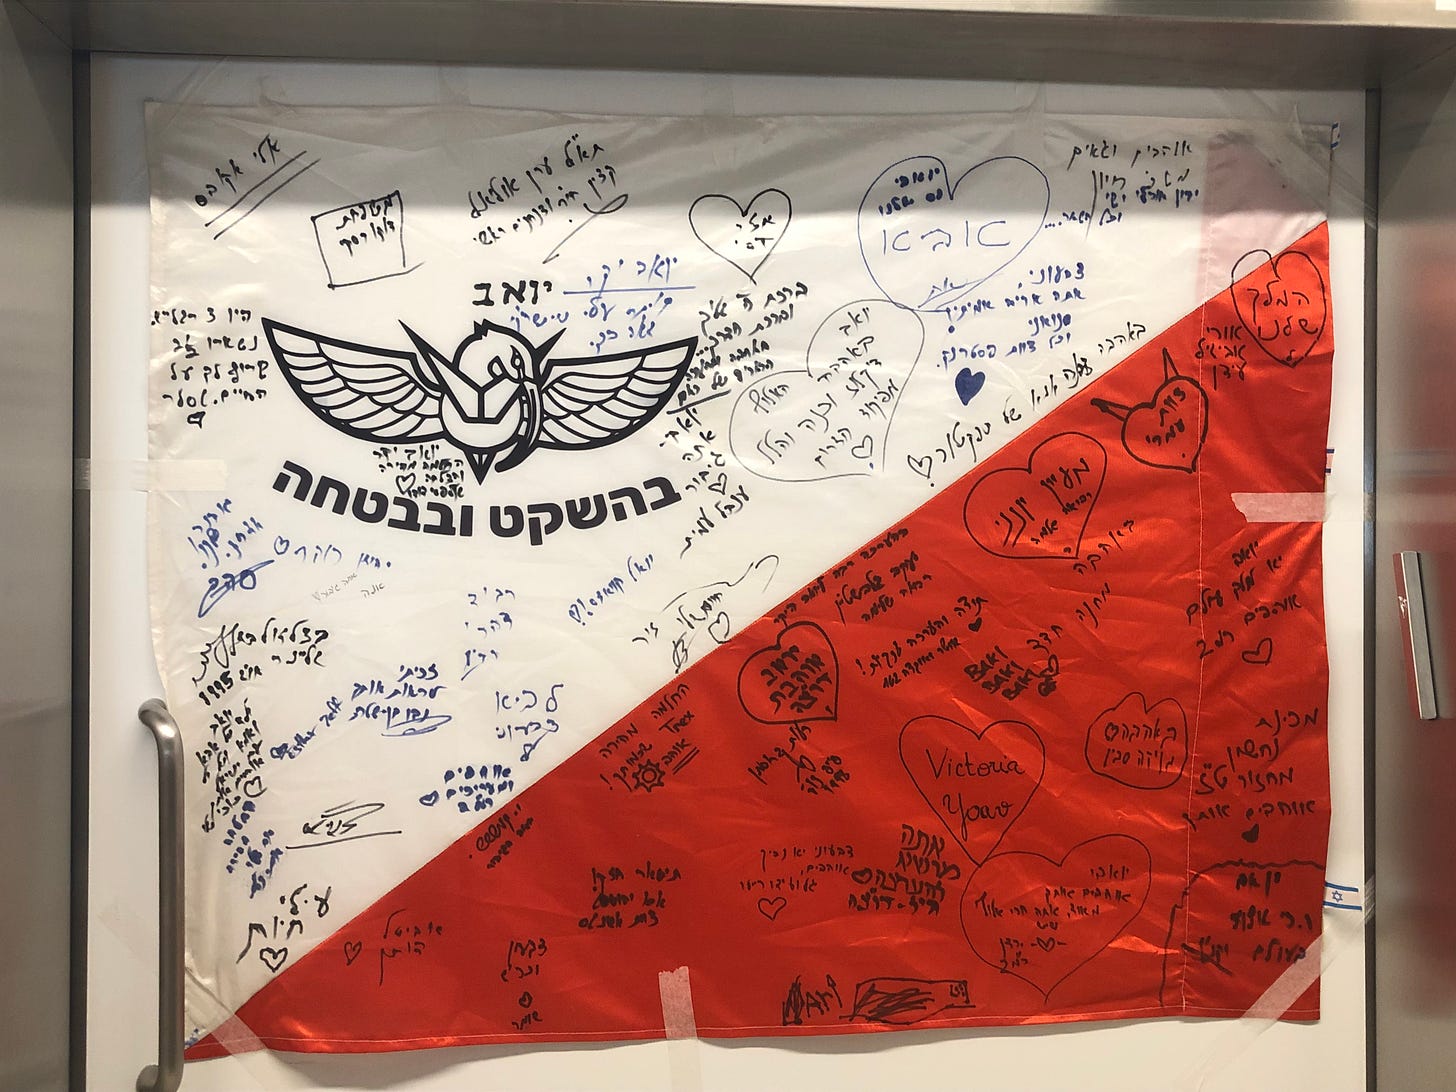 a flag signed by Y's unit